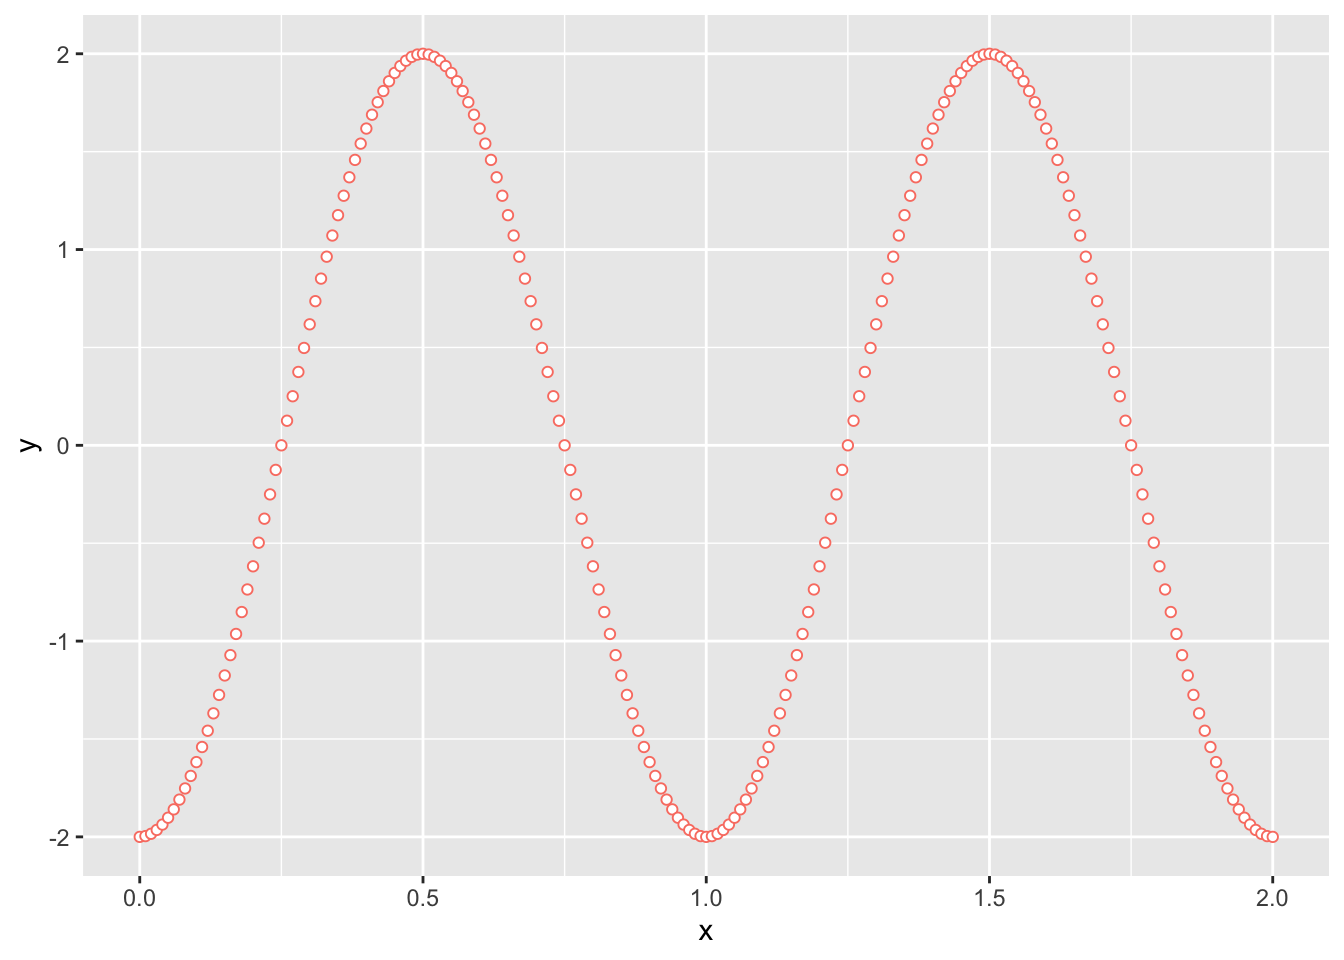 The same plot as above, but assembled with __ggplot2__.